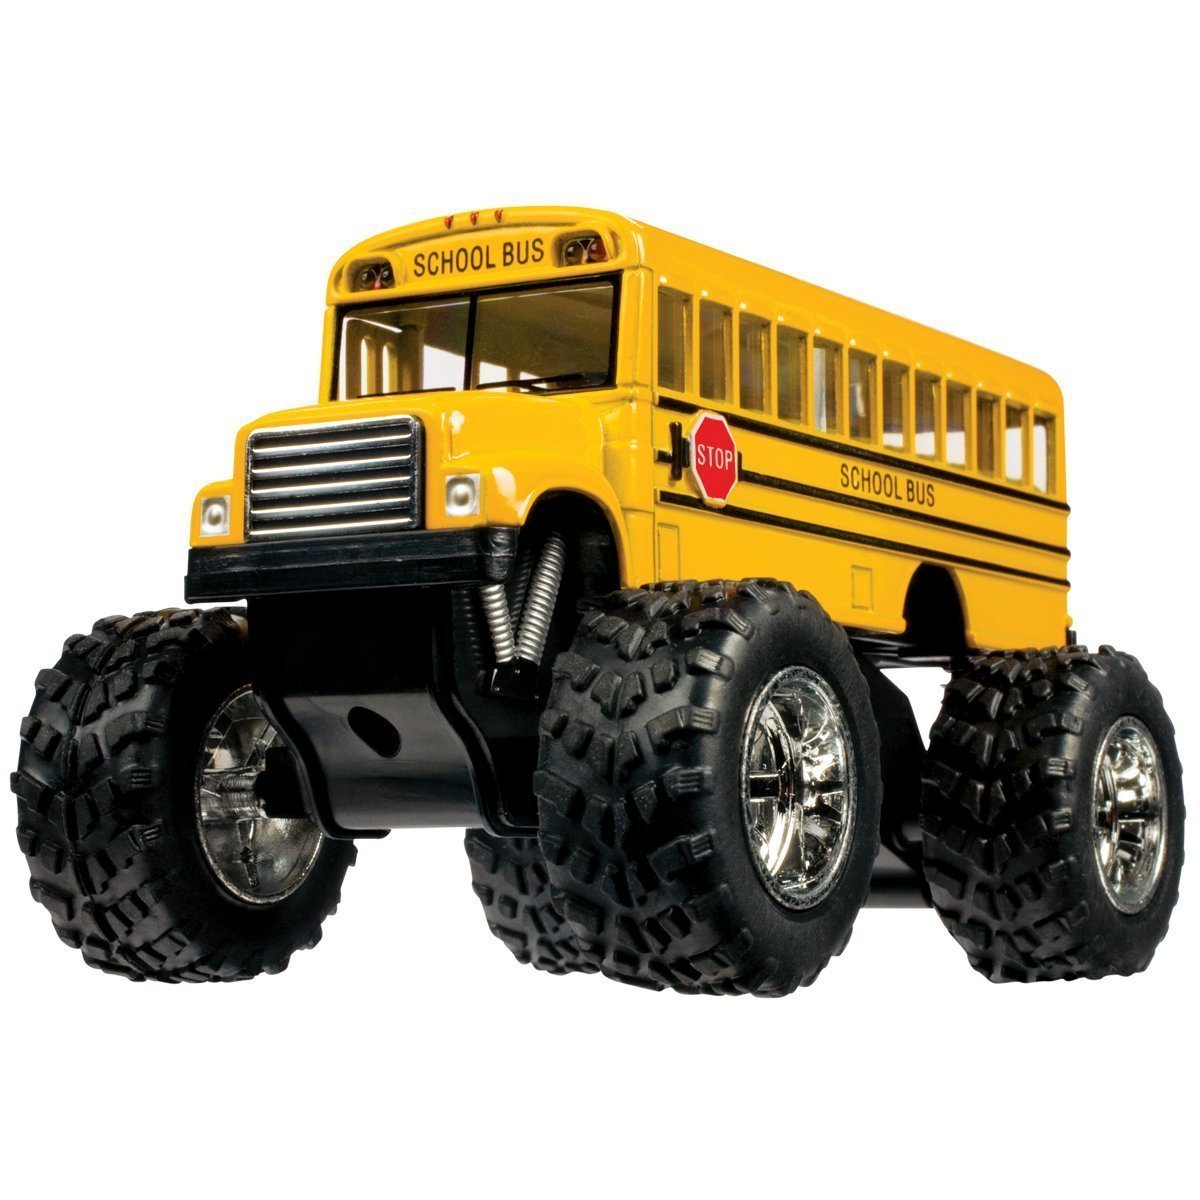 Toysmith 5020 Monster Bus, 5-Inch - image 1 of 7